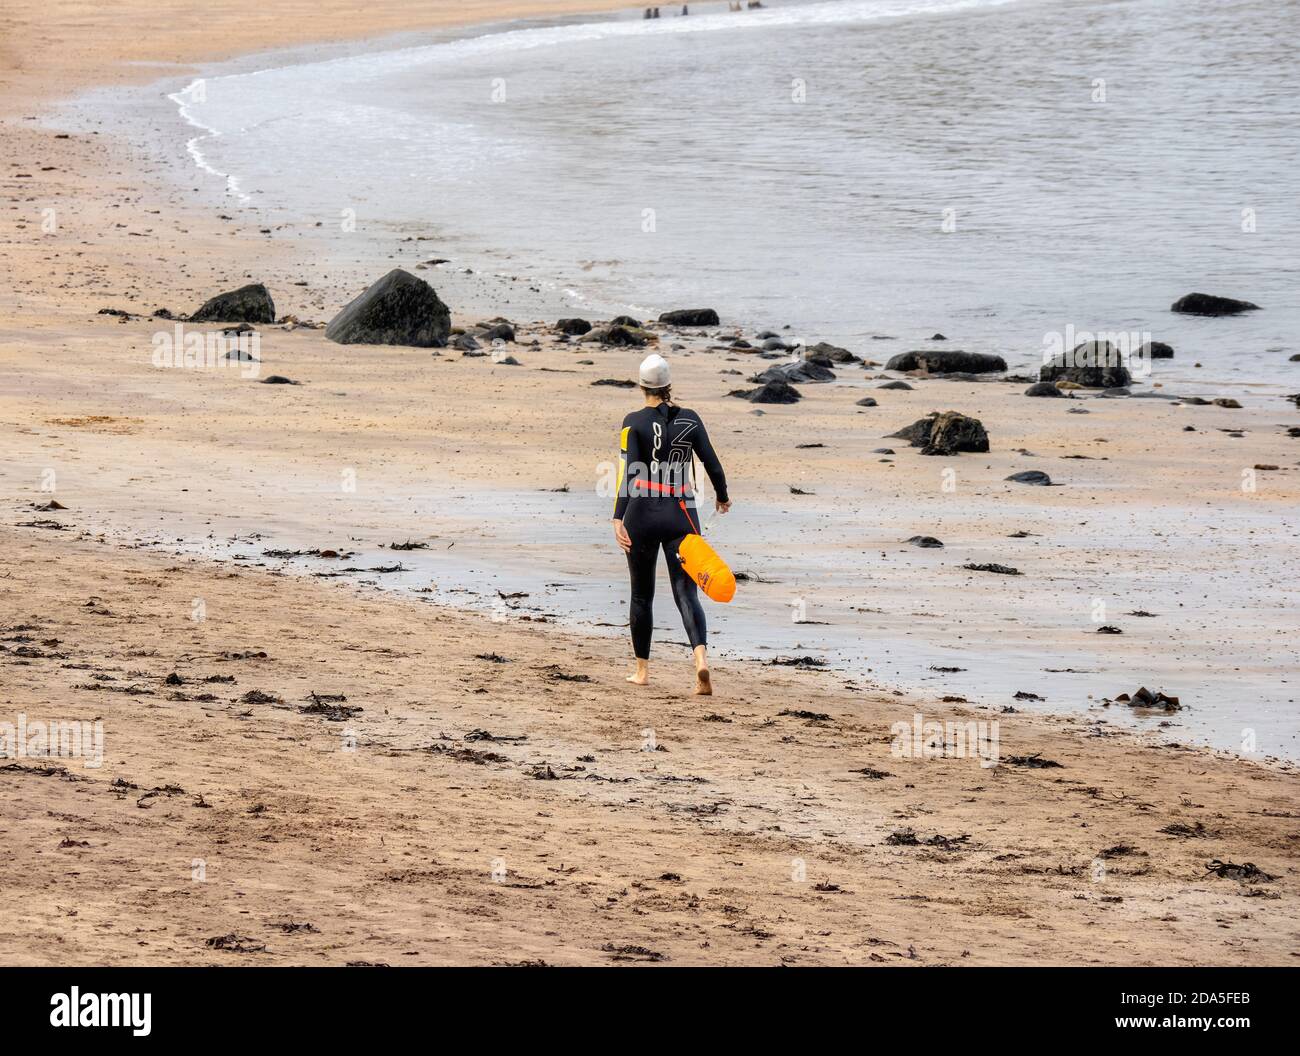 Woman on a beach wearing wetsuit and swimming cap, North Berwick, East Lothian, Scotland, UK. Stock Photo